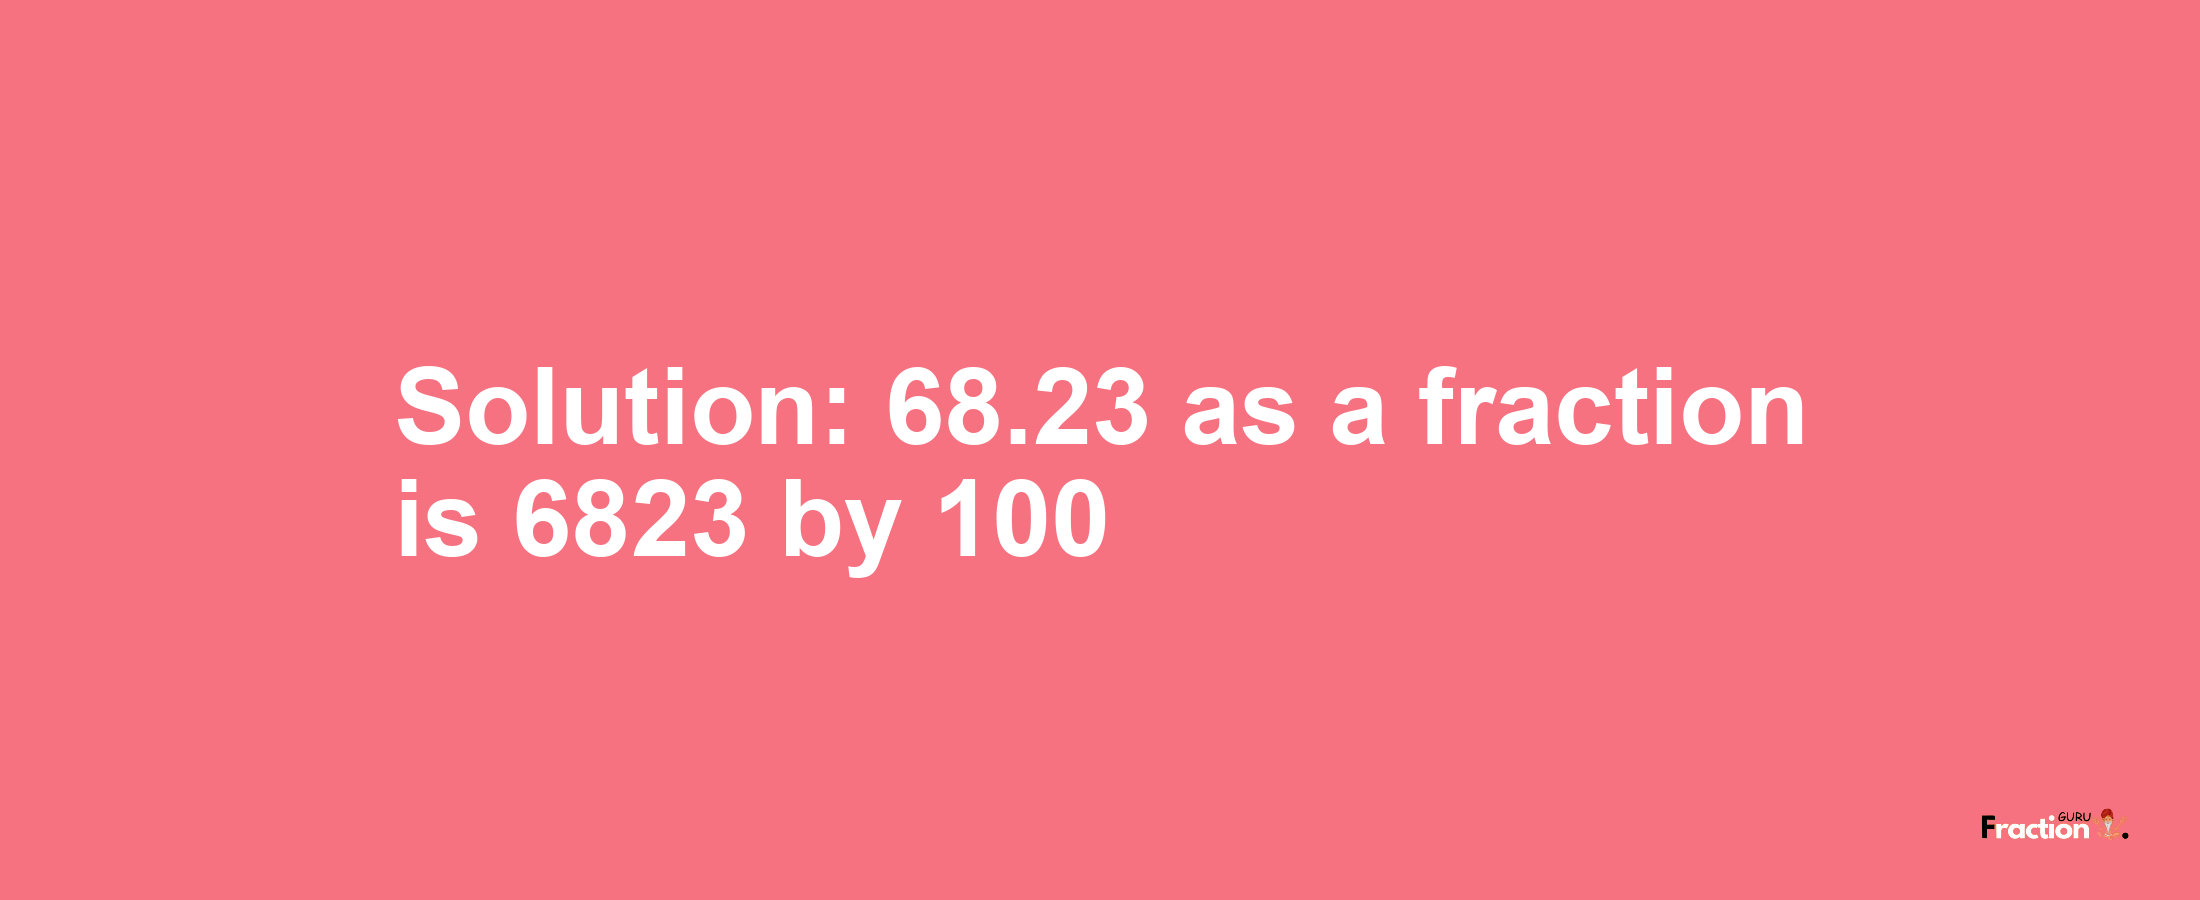 Solution:68.23 as a fraction is 6823/100